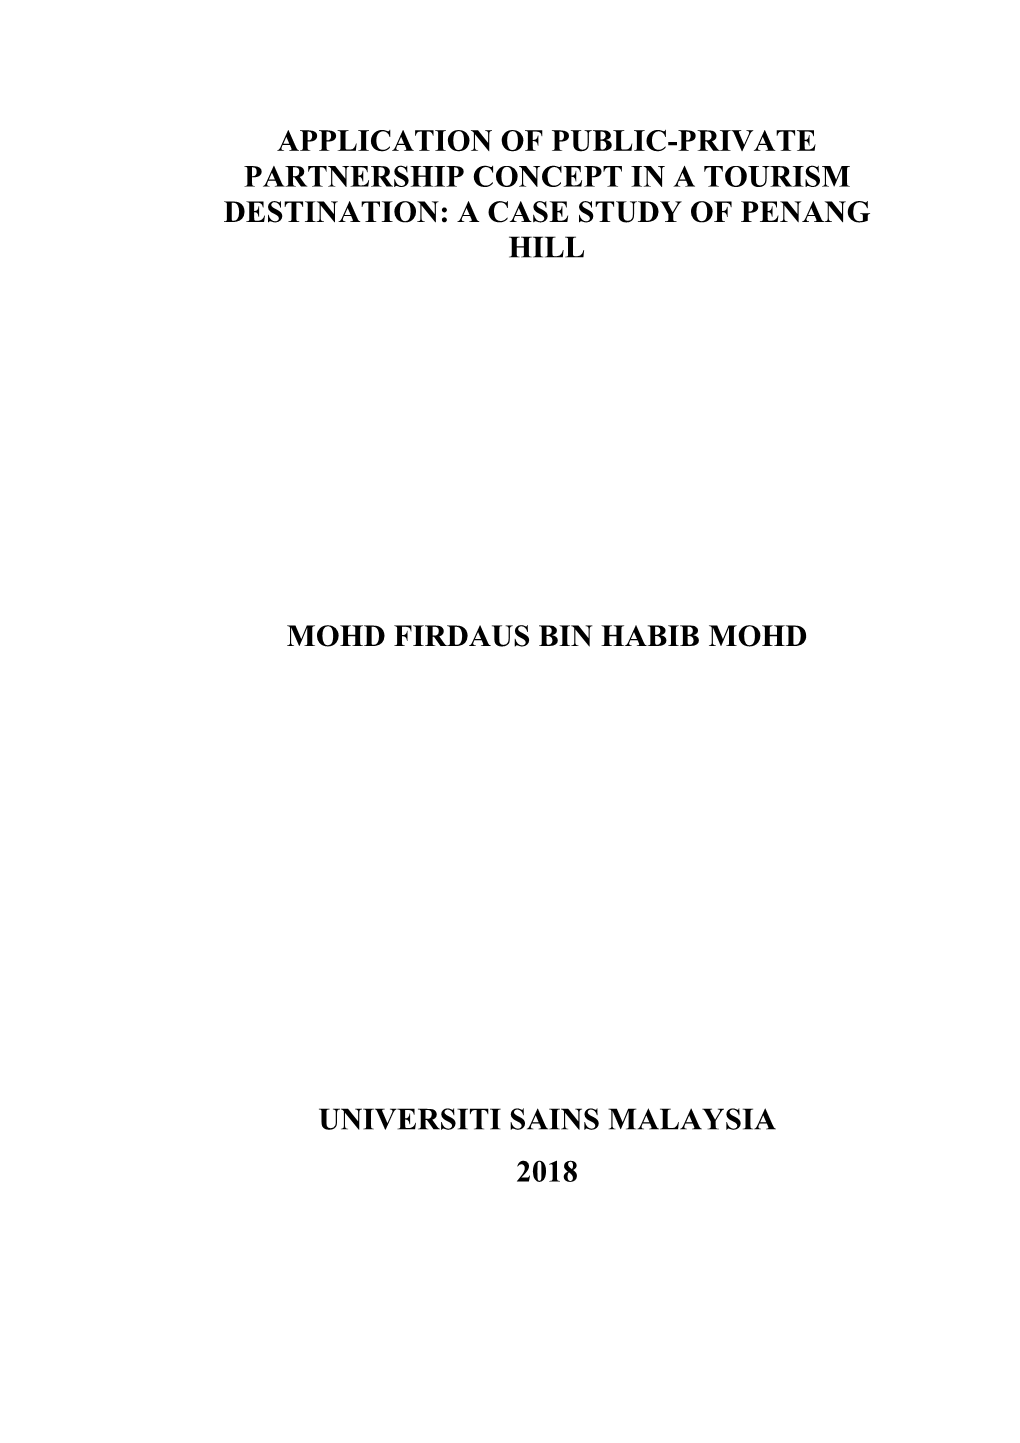 Application of Public-Private Partnership Concept in a Tourism Destination: a Case Study of Penang Hill